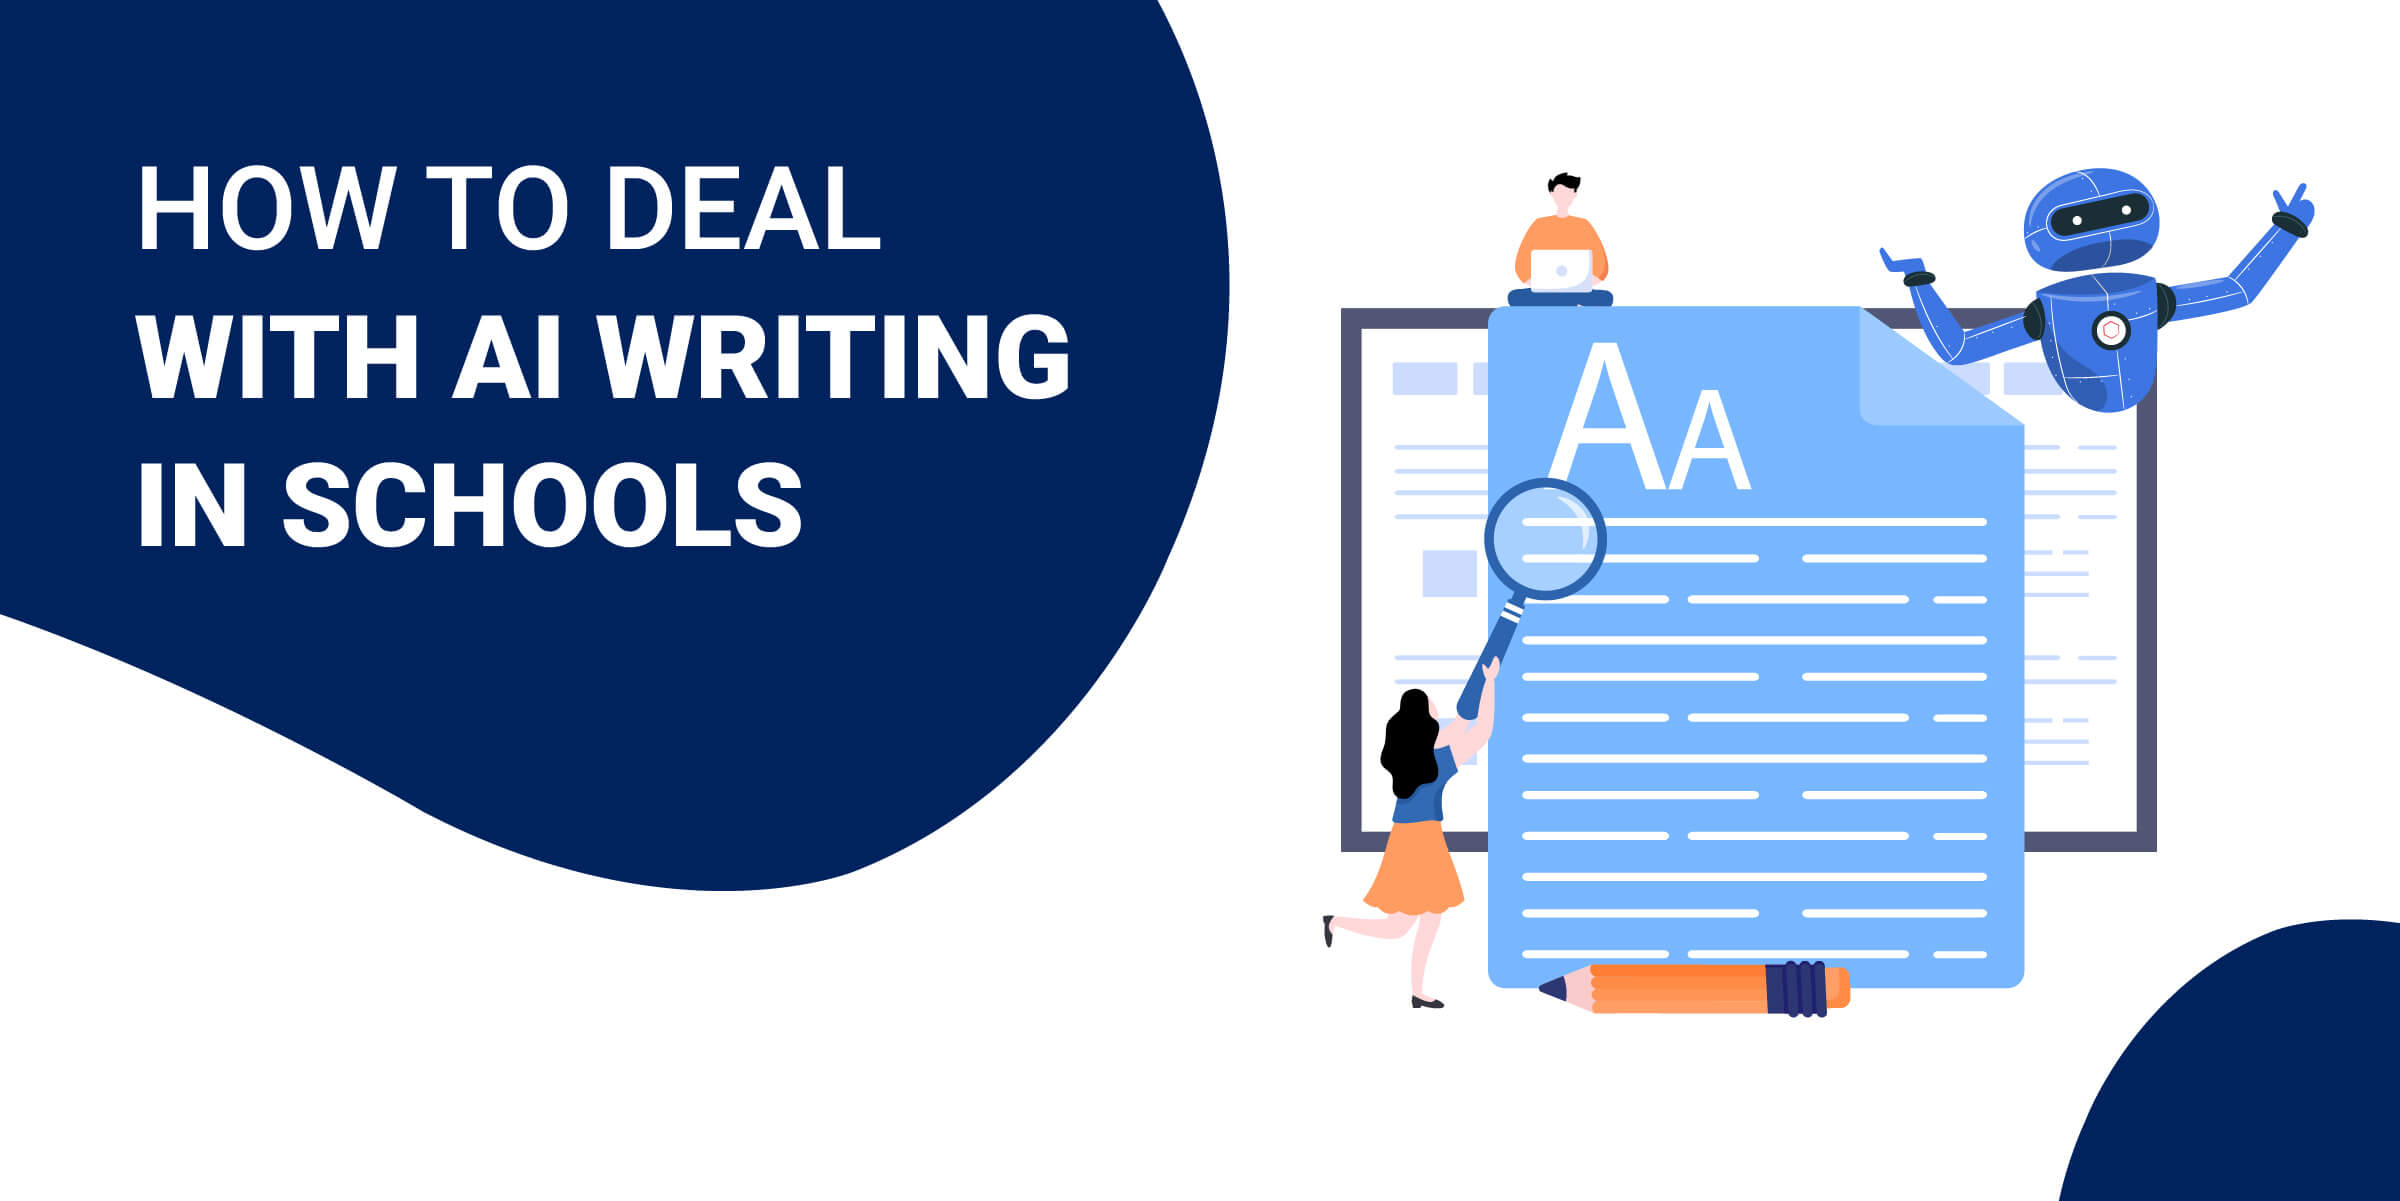 How to Deal With AI Writing in Schools